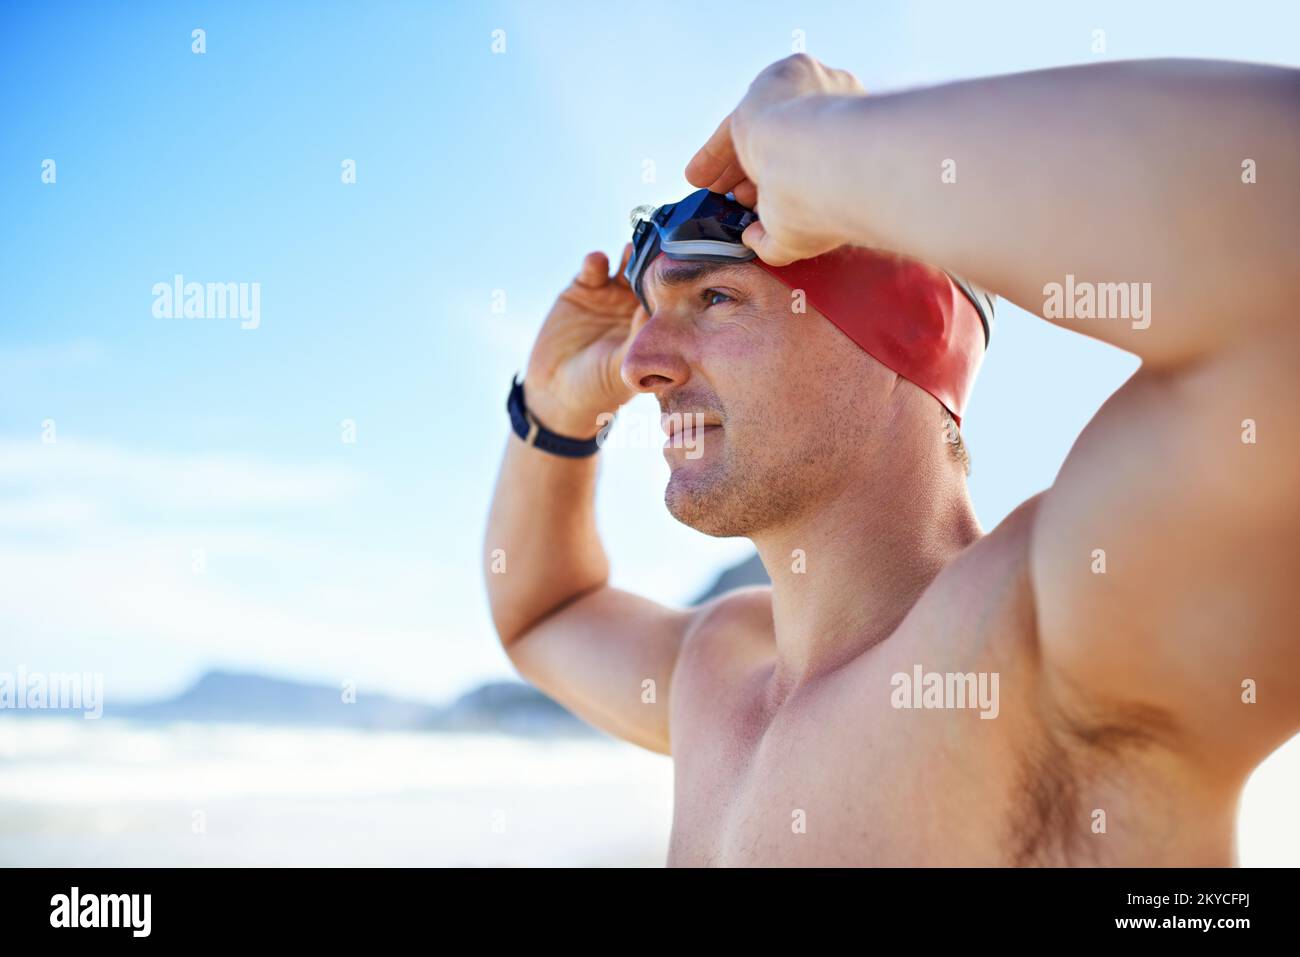 Preparing himself for his own record time. Cropped closeup shot of a man wearing swimming goggles looking out at the ocean. Stock Photo